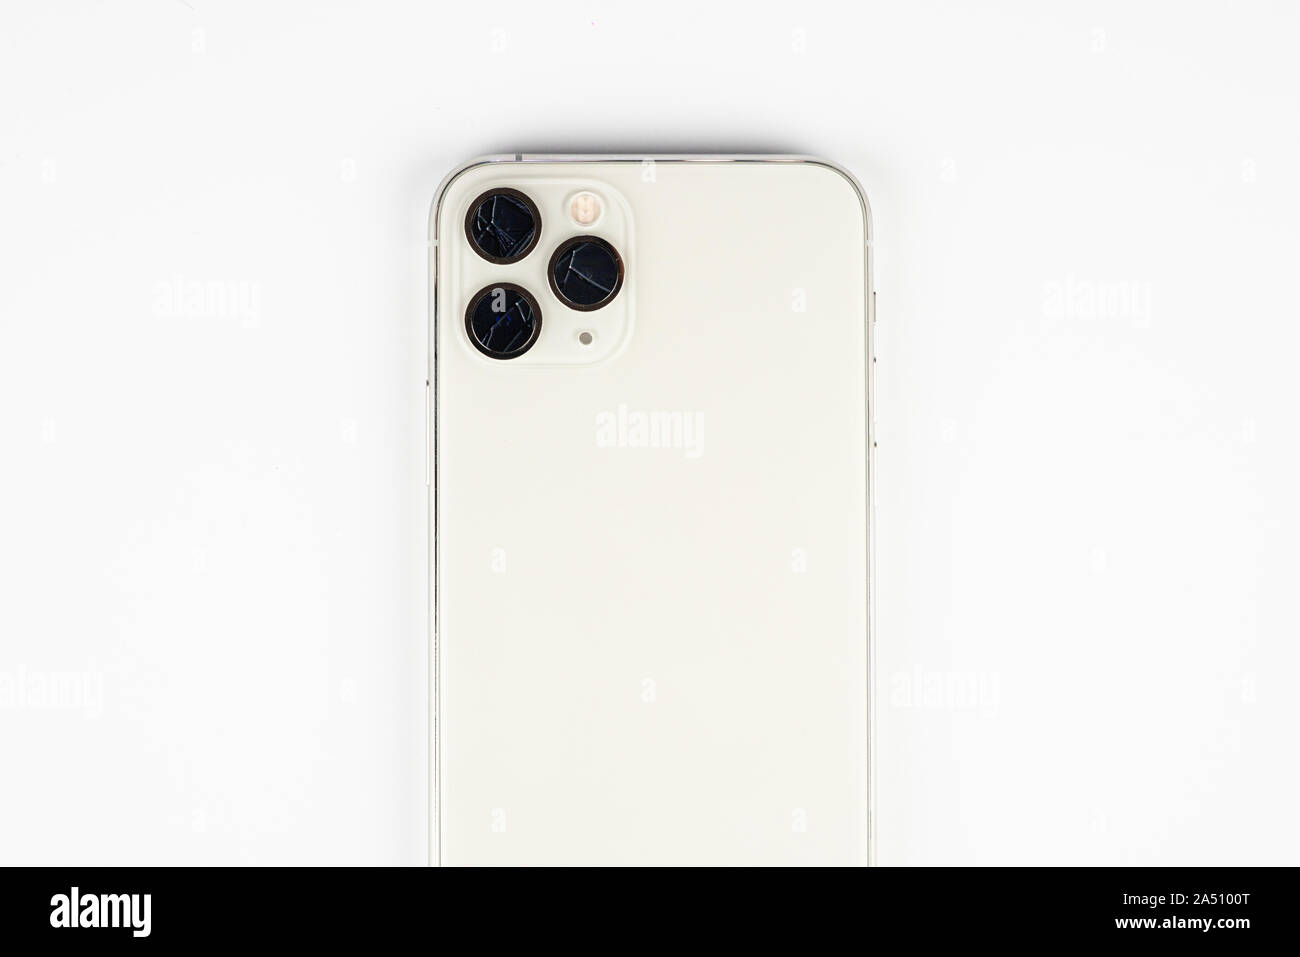 Broken Lens Of Iphone 11 Pro Max Isolated On White Background Stock Photo Alamy